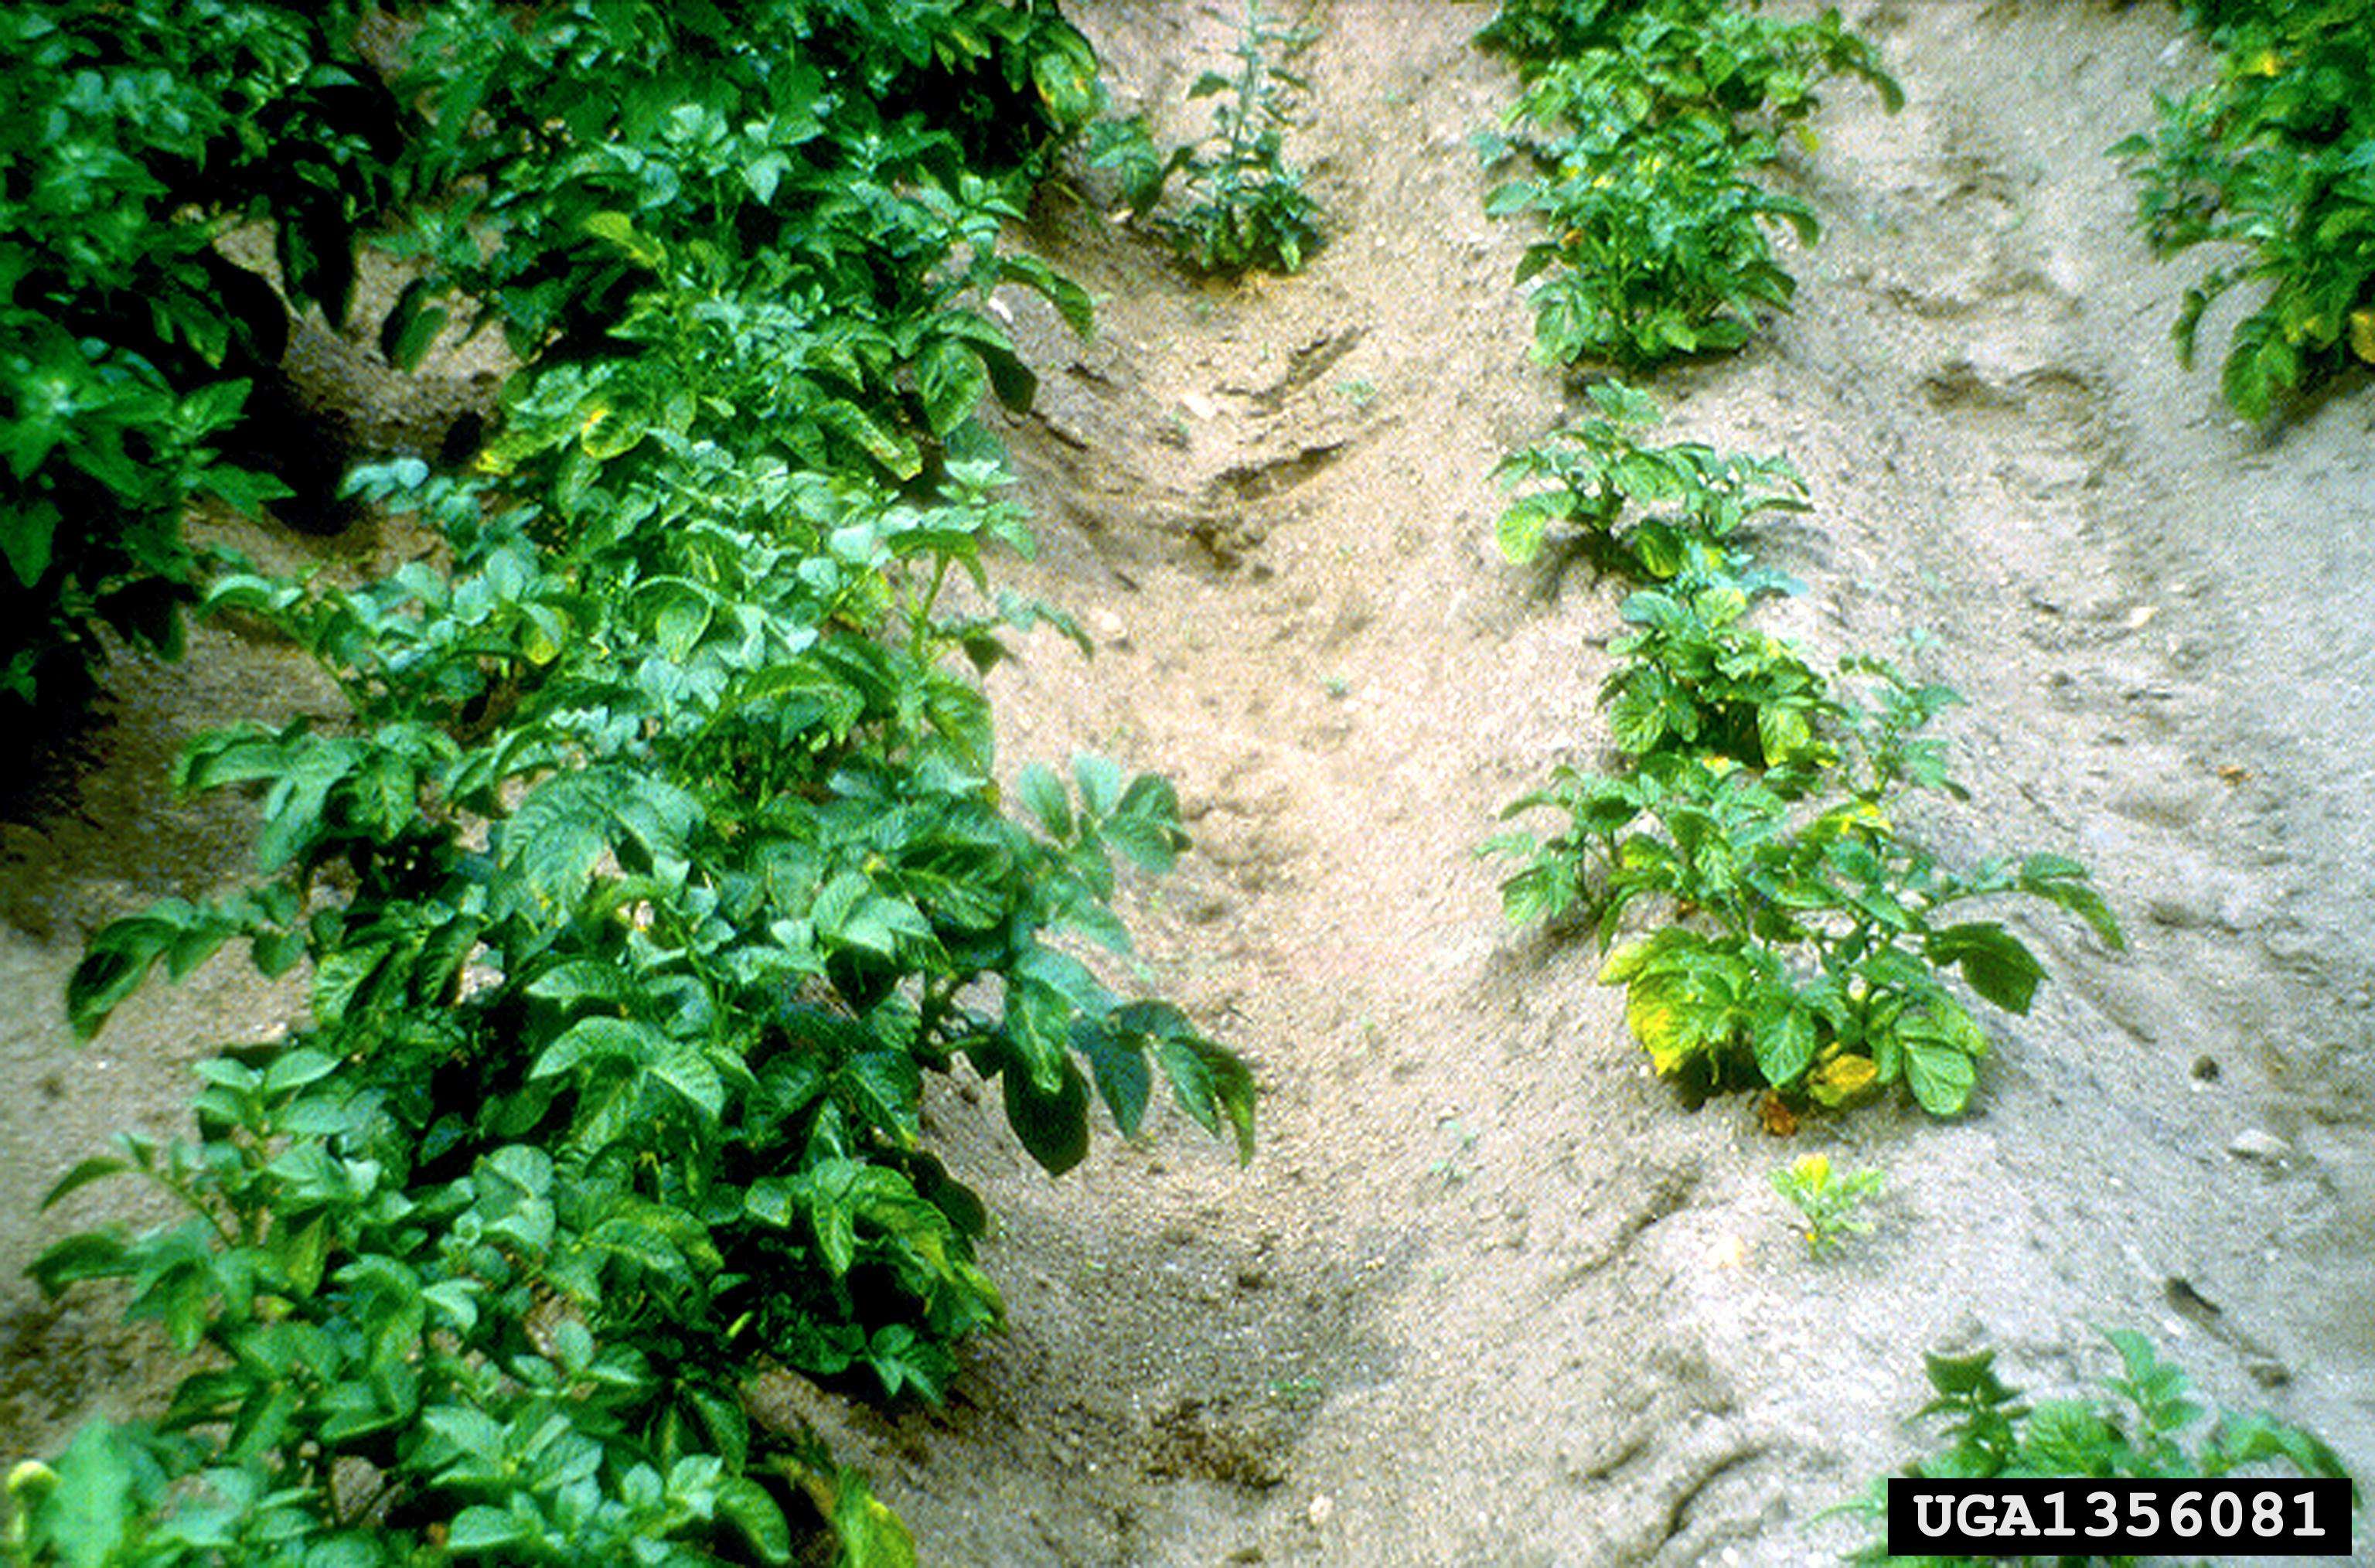 Potato Plants Infected with Globodera rostochiensis